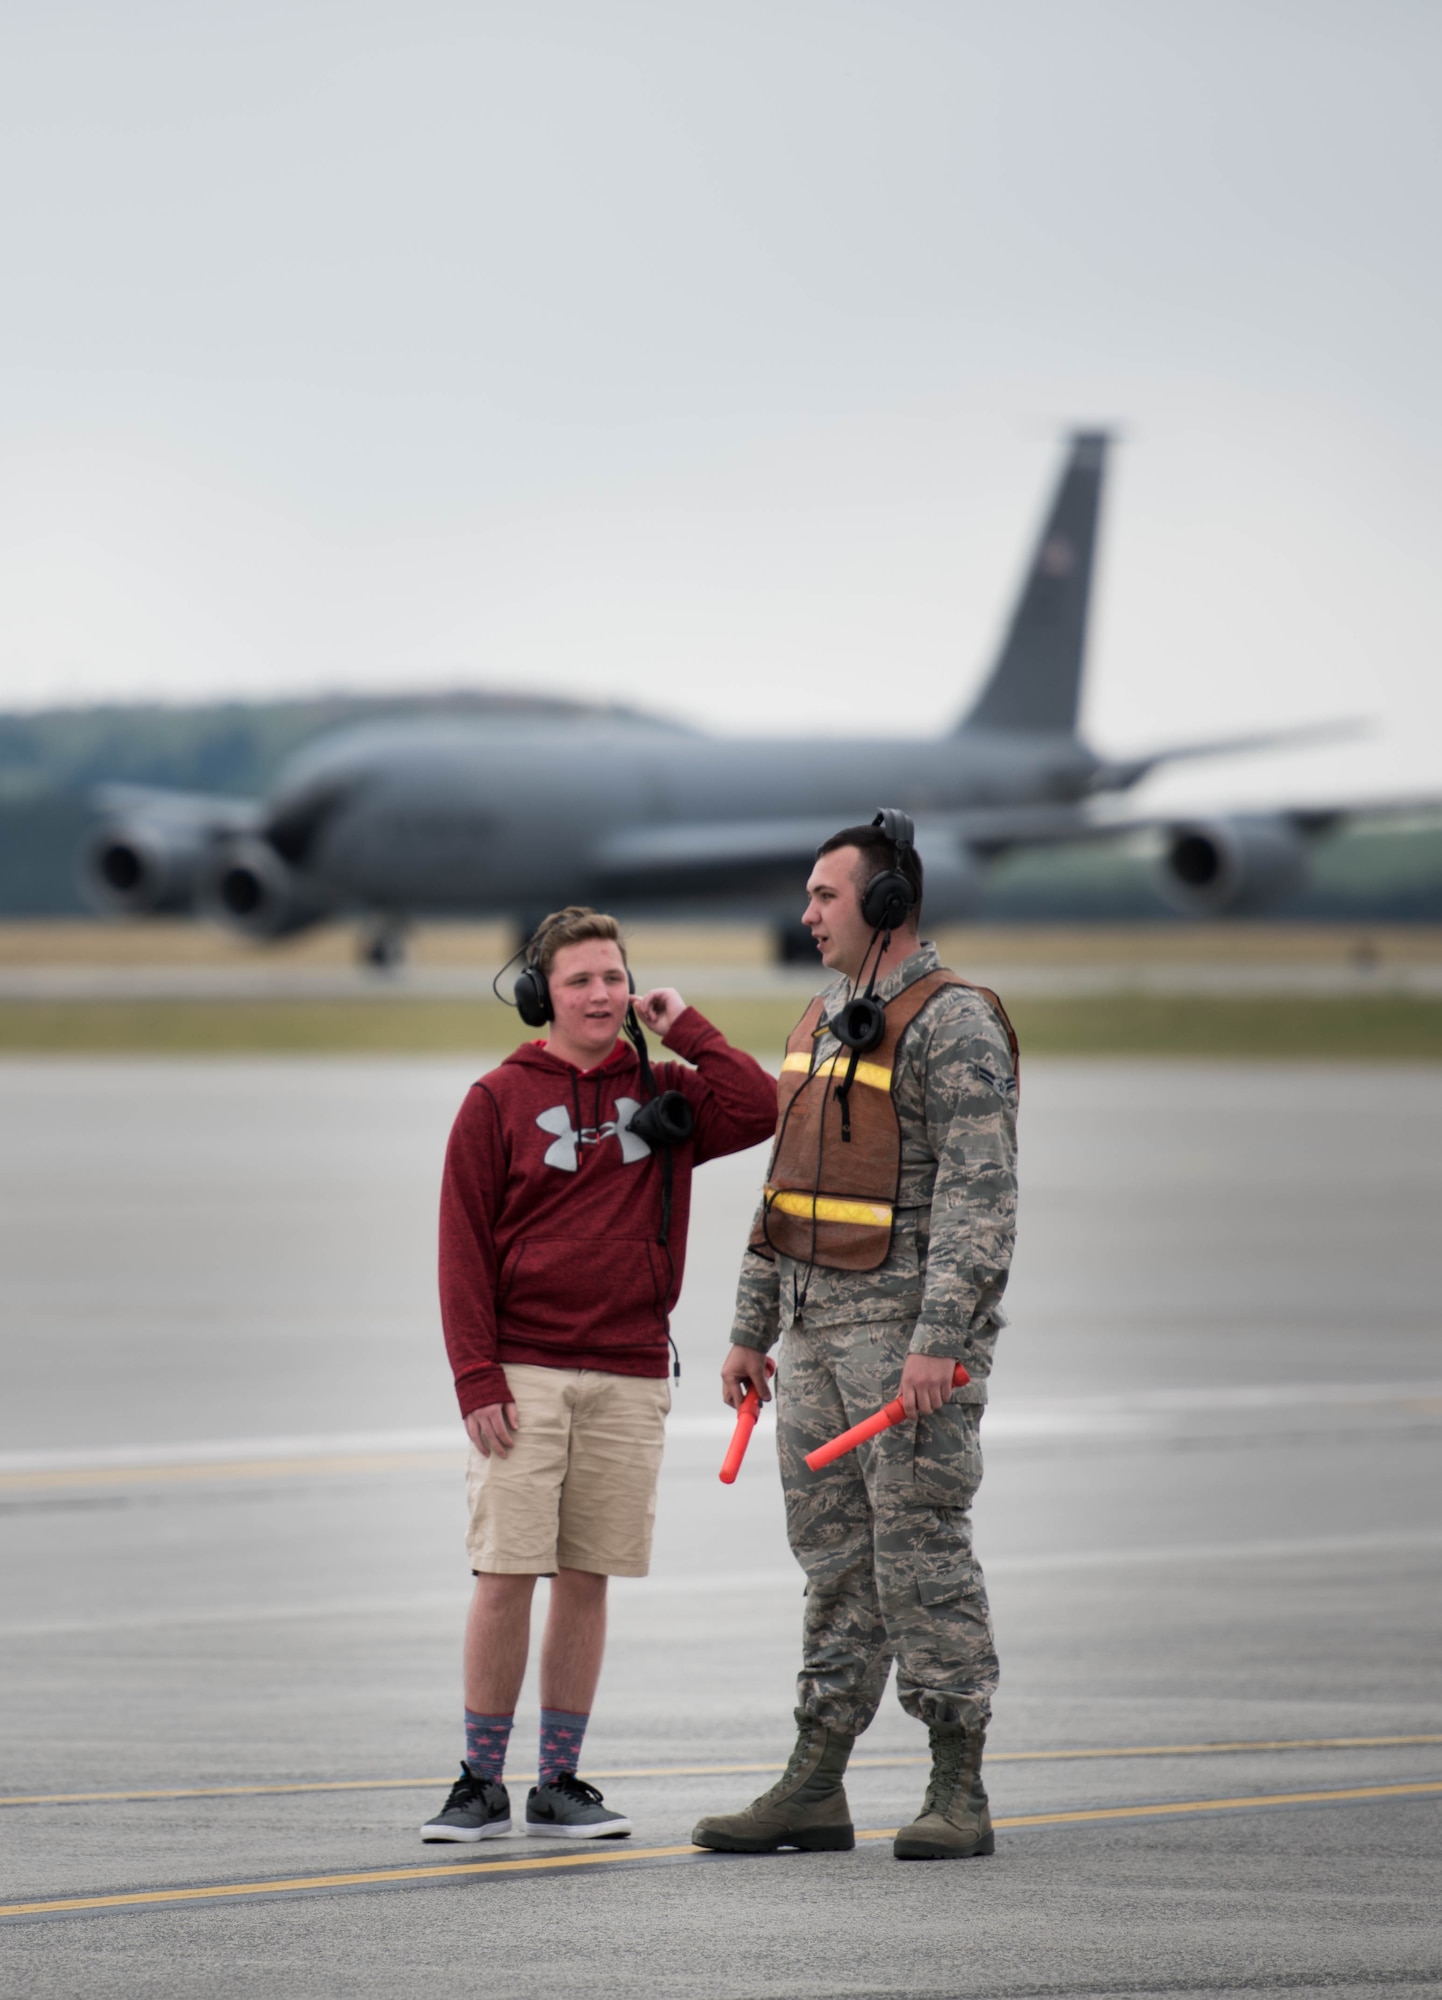 Matt Fritz, son of Col. Matthew Fritz, prepares to marshal in his father at the end of his final flight as vice commander of the 92nd Air Refueling Wing June 15, 2017, at Fairchild Air Force Base, Washington. Prior to his command assignment, Col. Fritz was the director of the National Assessment Group, Kirtland Air Force Base, New Mexico. (U.S. Air Force photo/Senior Airman Sean Campbell)